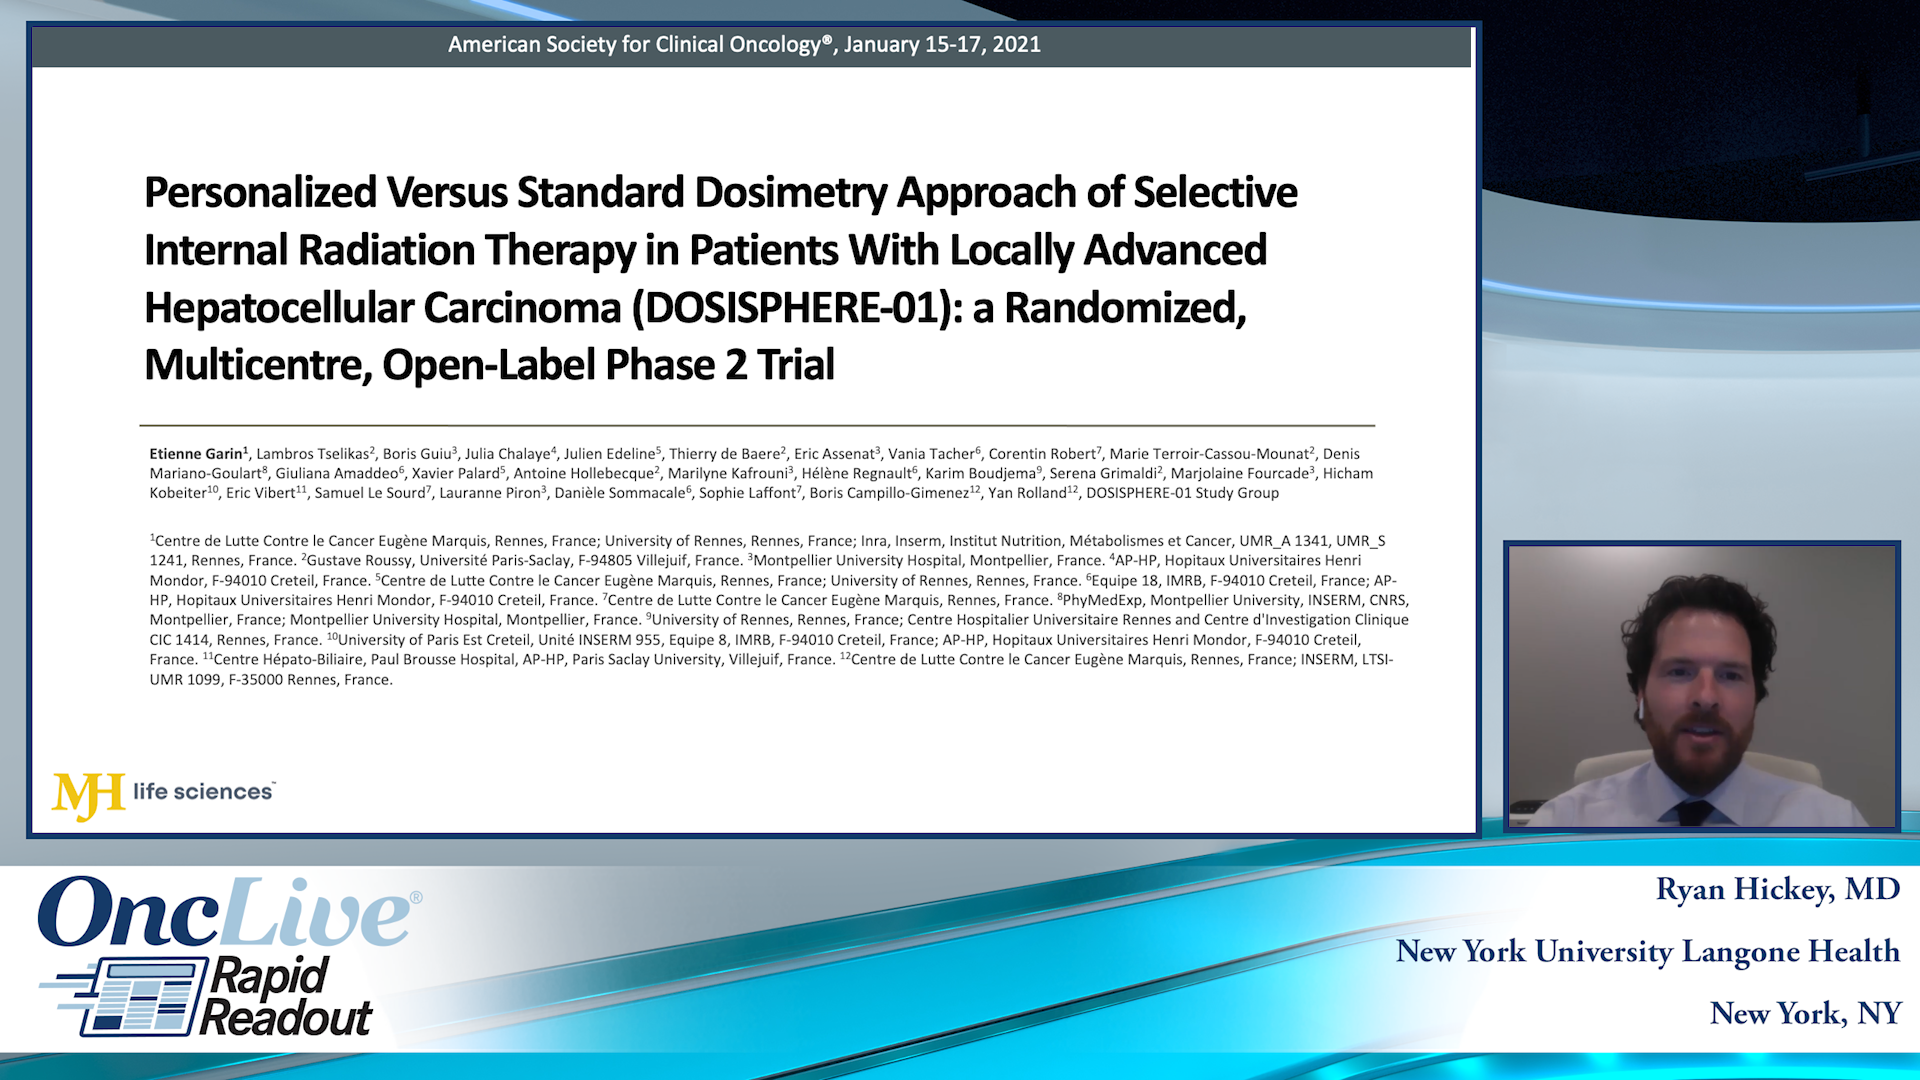 Rapid Readouts: Personalized versus standard dosimetry approach of selective internal radiation therapy in patients with locally advanced hepatocellular carcinoma (DOSISPHERE-01): a randomized, multicentre, open-label phase 2 trial